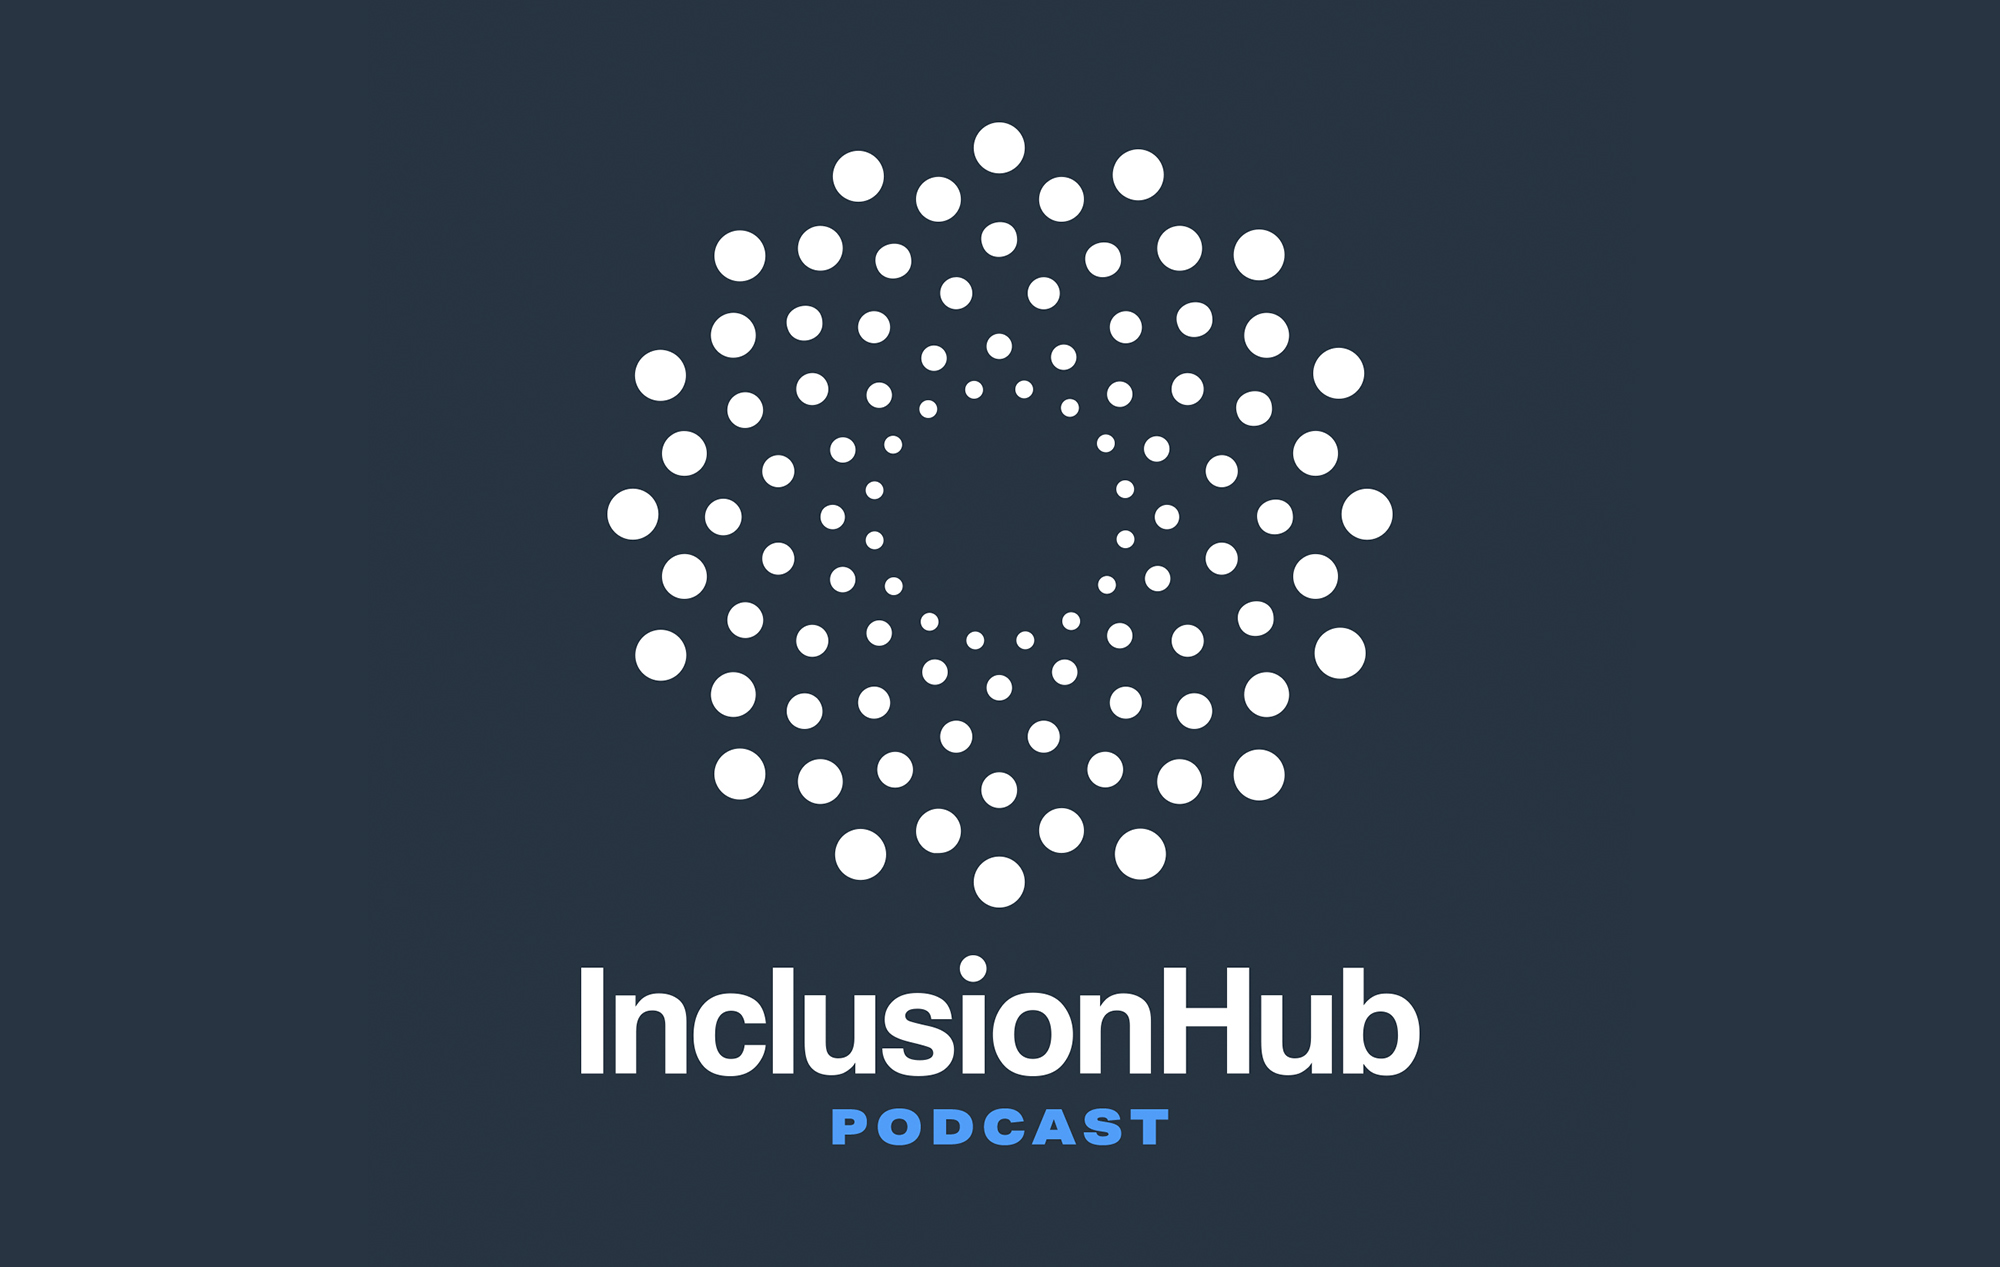 Episode 10: ‘A More Accessible & Inclusive World Is a Better World’